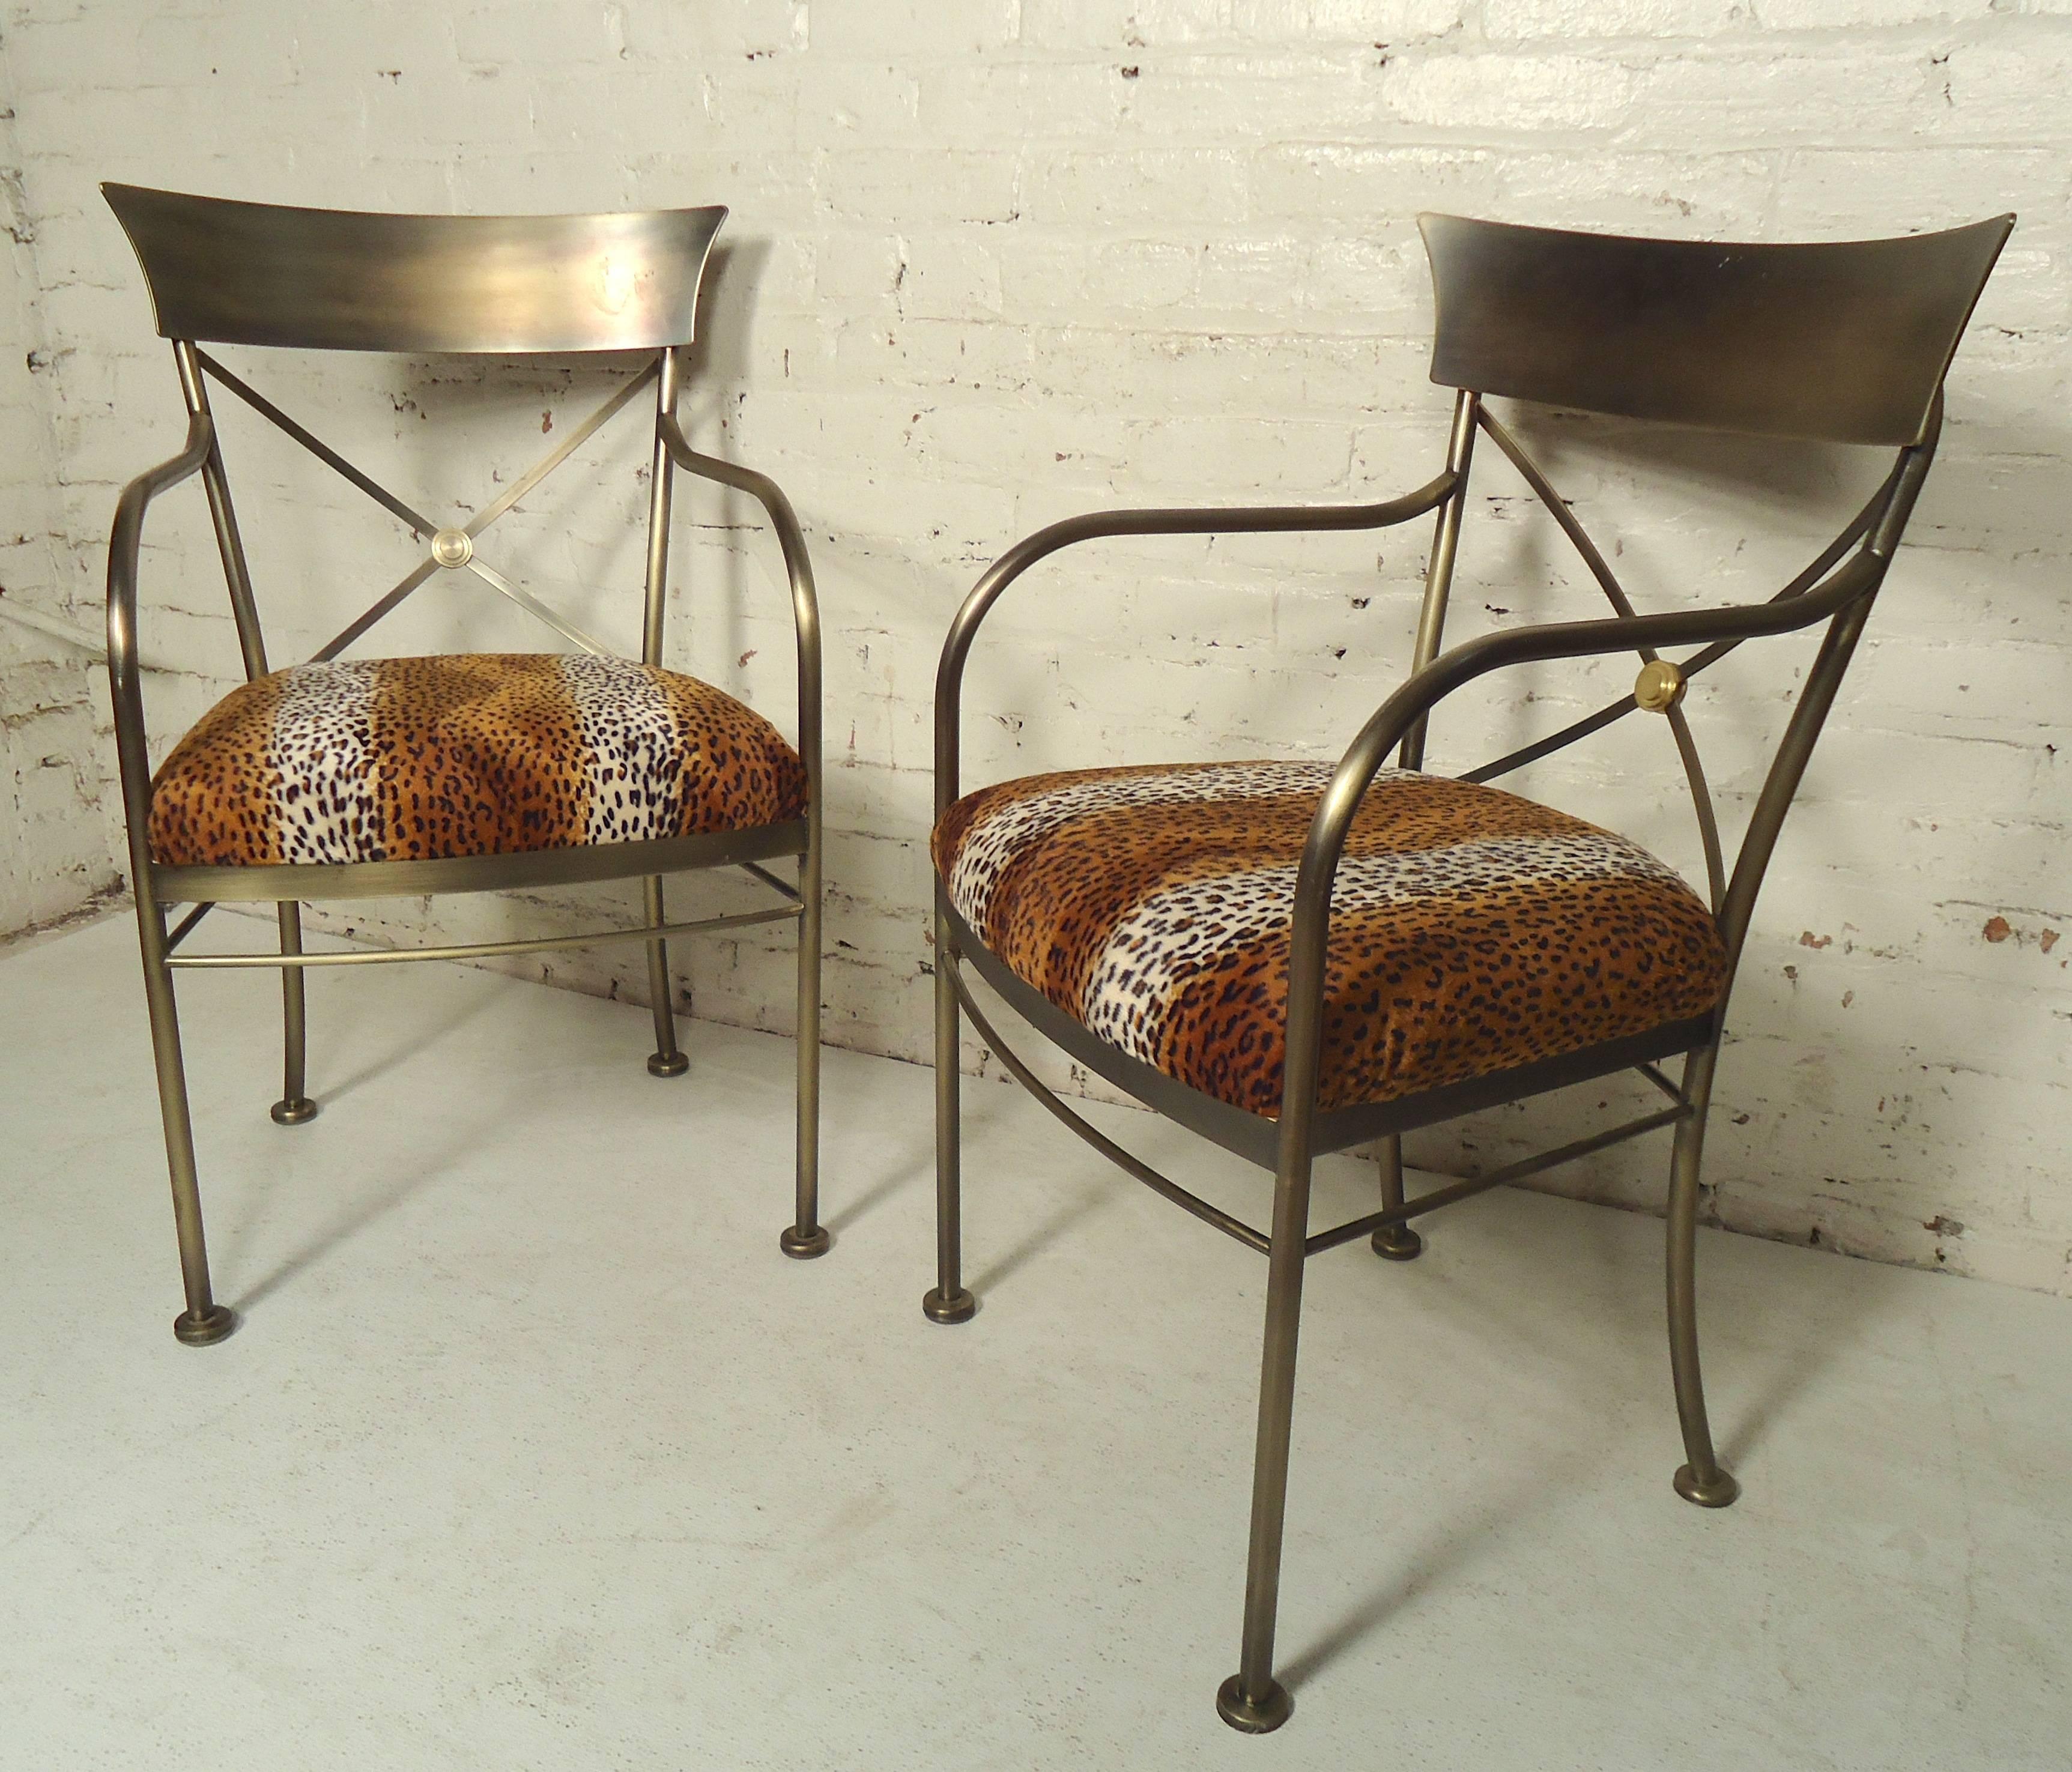 Striking side chairs with wild cheetah pattern. Brass frames with a soft brush finish.

(Please confirm item location - NY or NJ - with dealer).
  